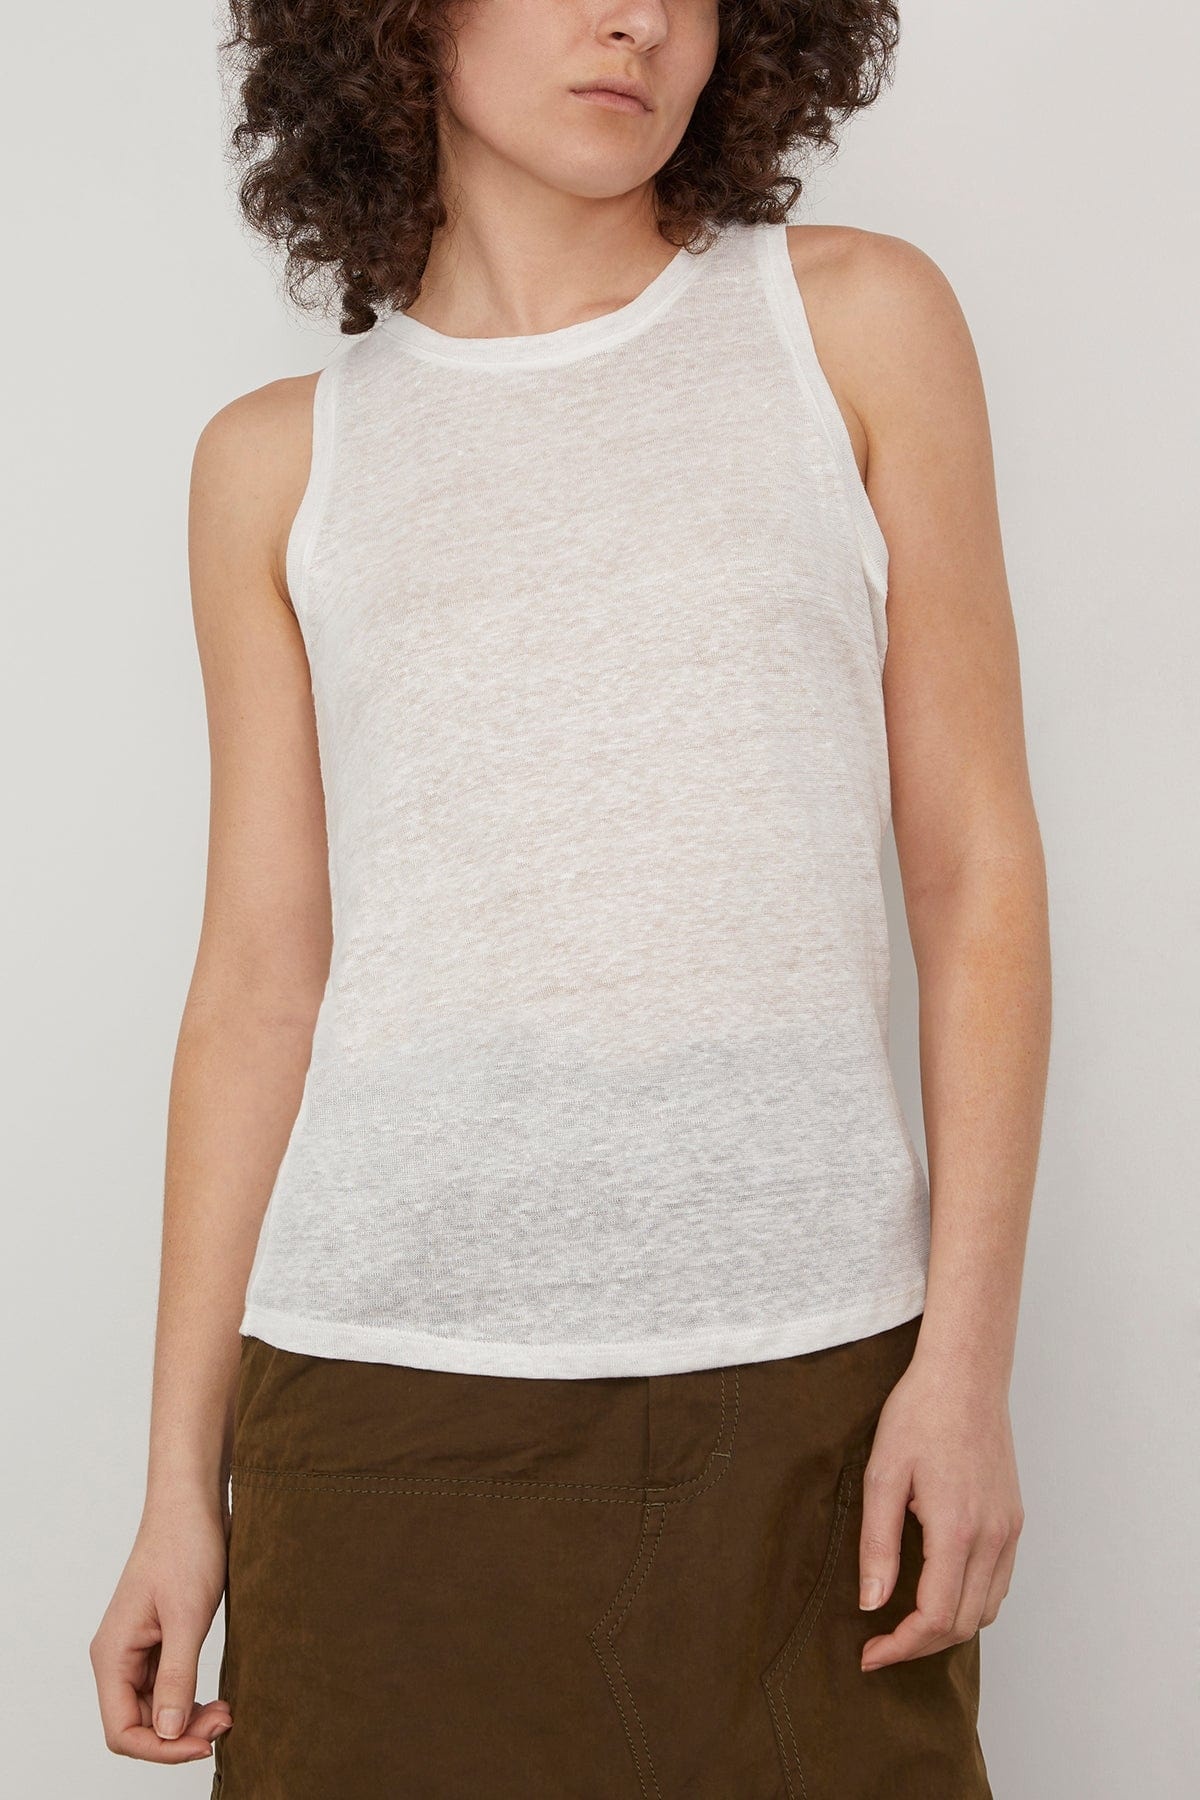 Natural Ease Sleeveless Top in Shaded White - 3